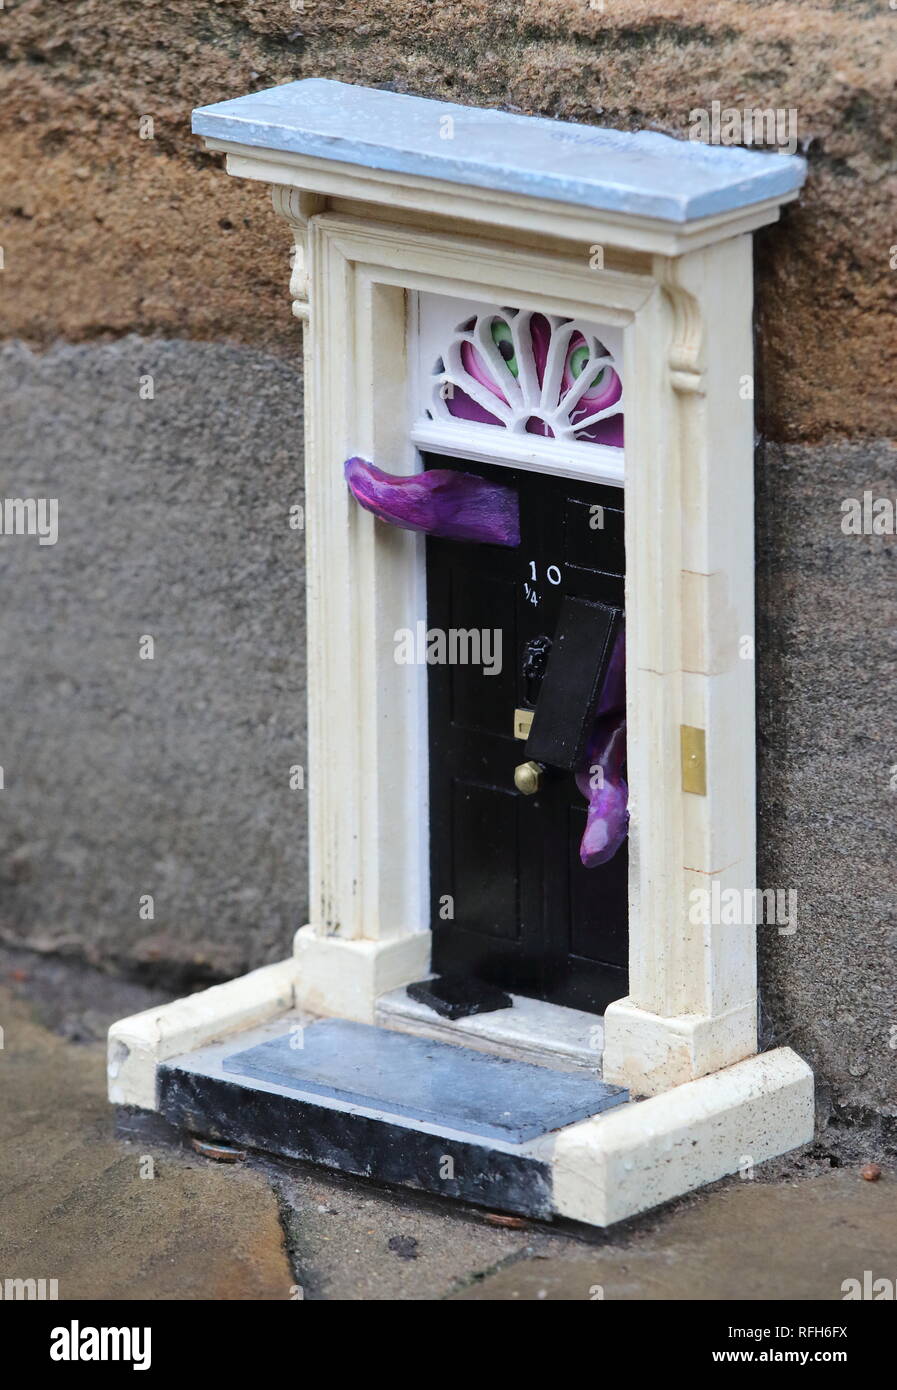 Cambridge, UK. 25th Jan, 2019. A tiny copy of the famous front door to the British Prime Minister's residence, No 10 Downing Street, London seen in Downing Street, CAMBRIDGE. Mystery Street artists going by the pseudonym of 'Dinky Doors' are responsible for the installation, which is the latest in an ongoing project. To date there are 'dinky doors' at the Reality Checker on Parker's Piece and the Teleport-O-Matic machine between red phone boxes by the Great St Mary's church in the city. Credit: SOPA Images Limited/Alamy Live News Stock Photo